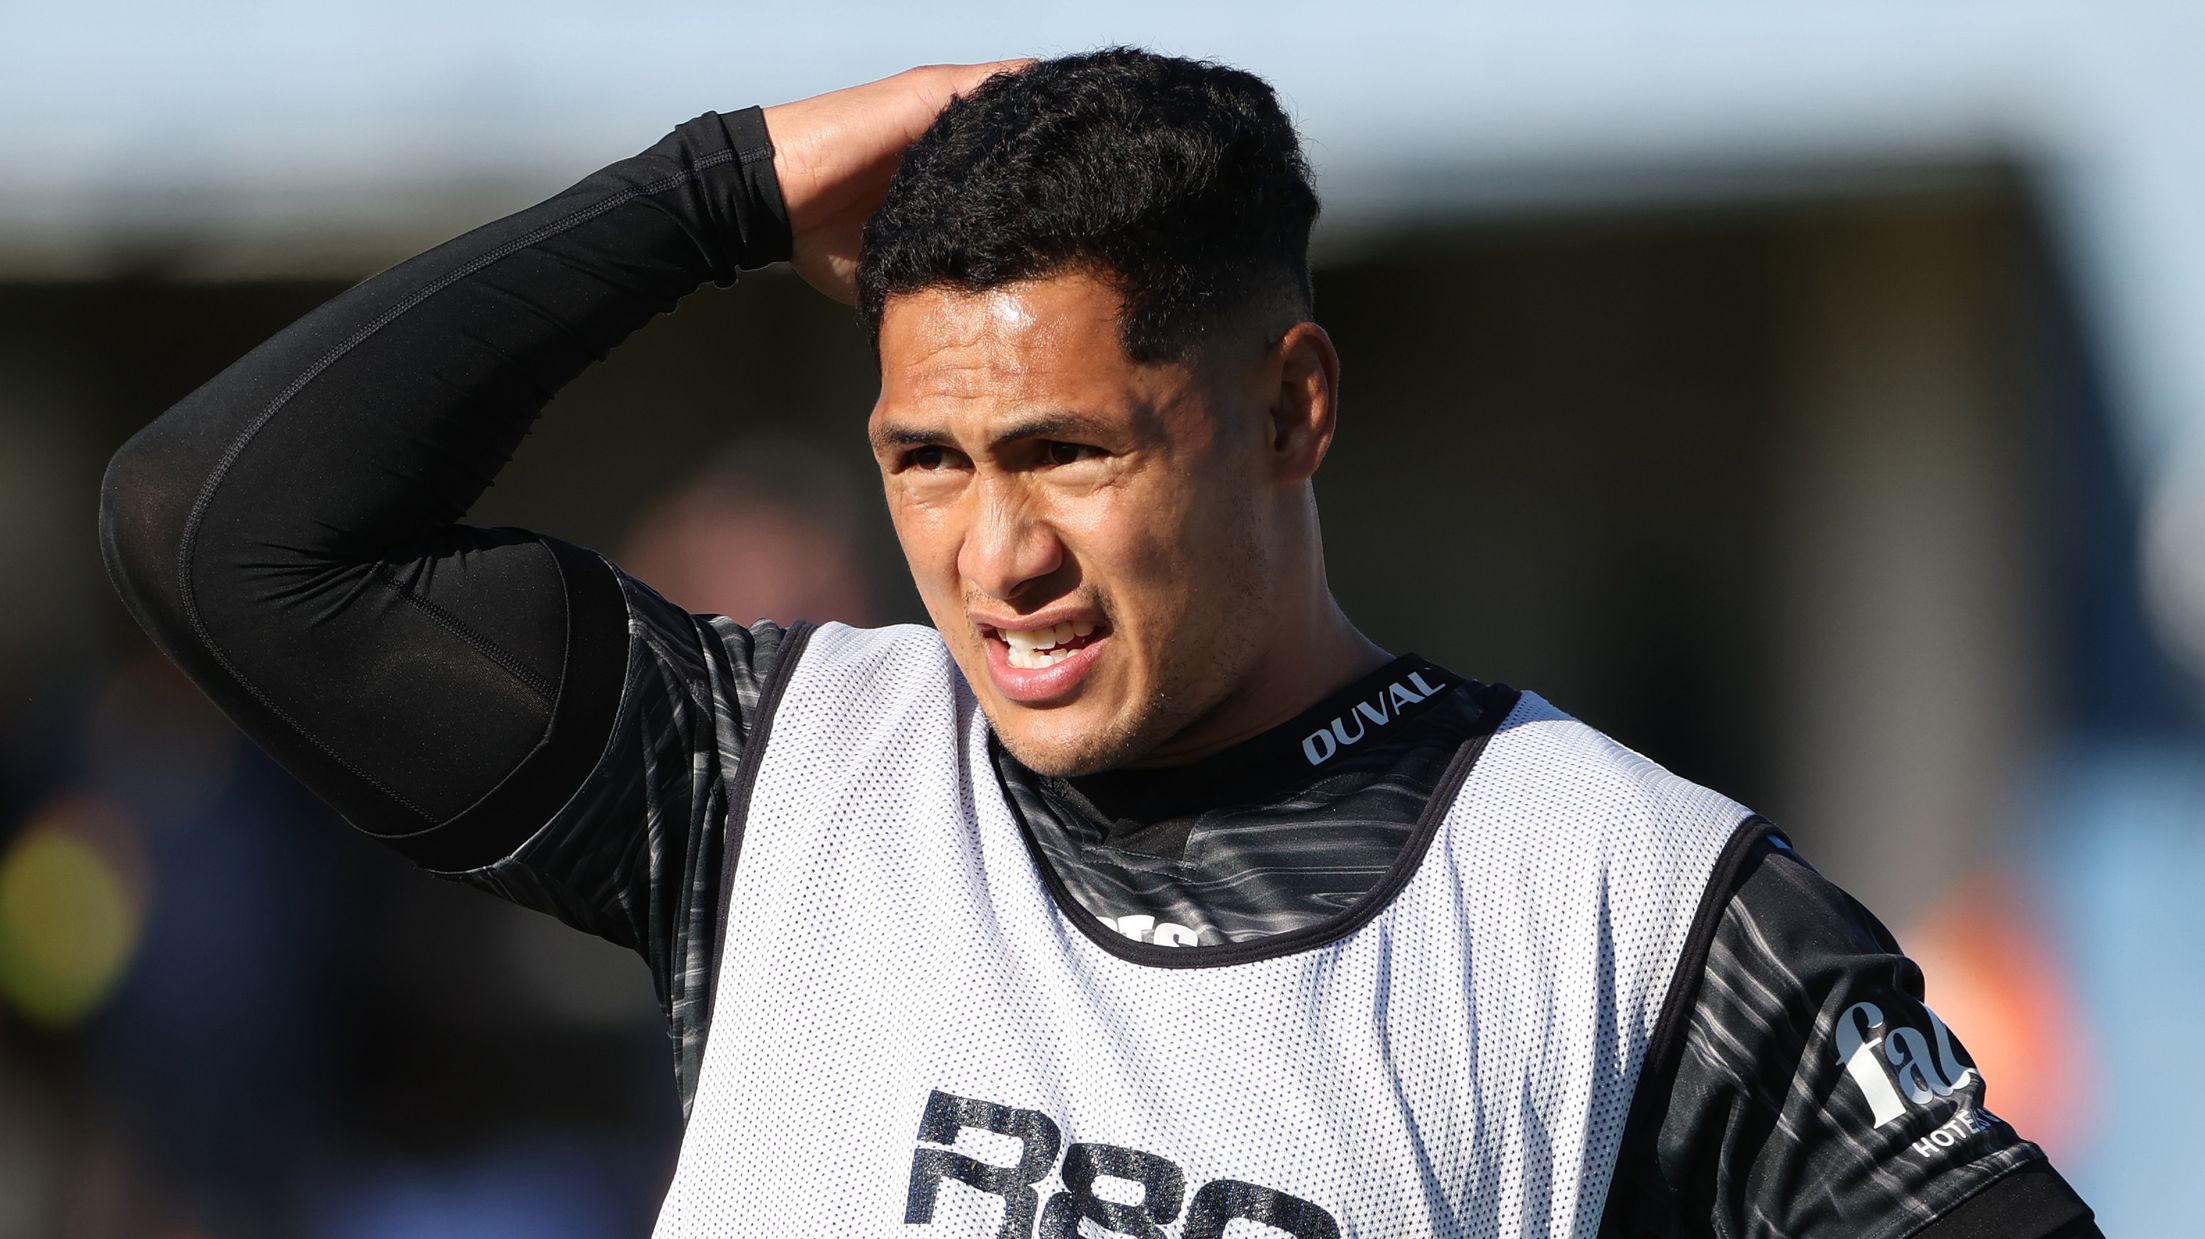 Roger Tuivasa-Sheck trained with the Blues before being knocked out in the semi-finals.